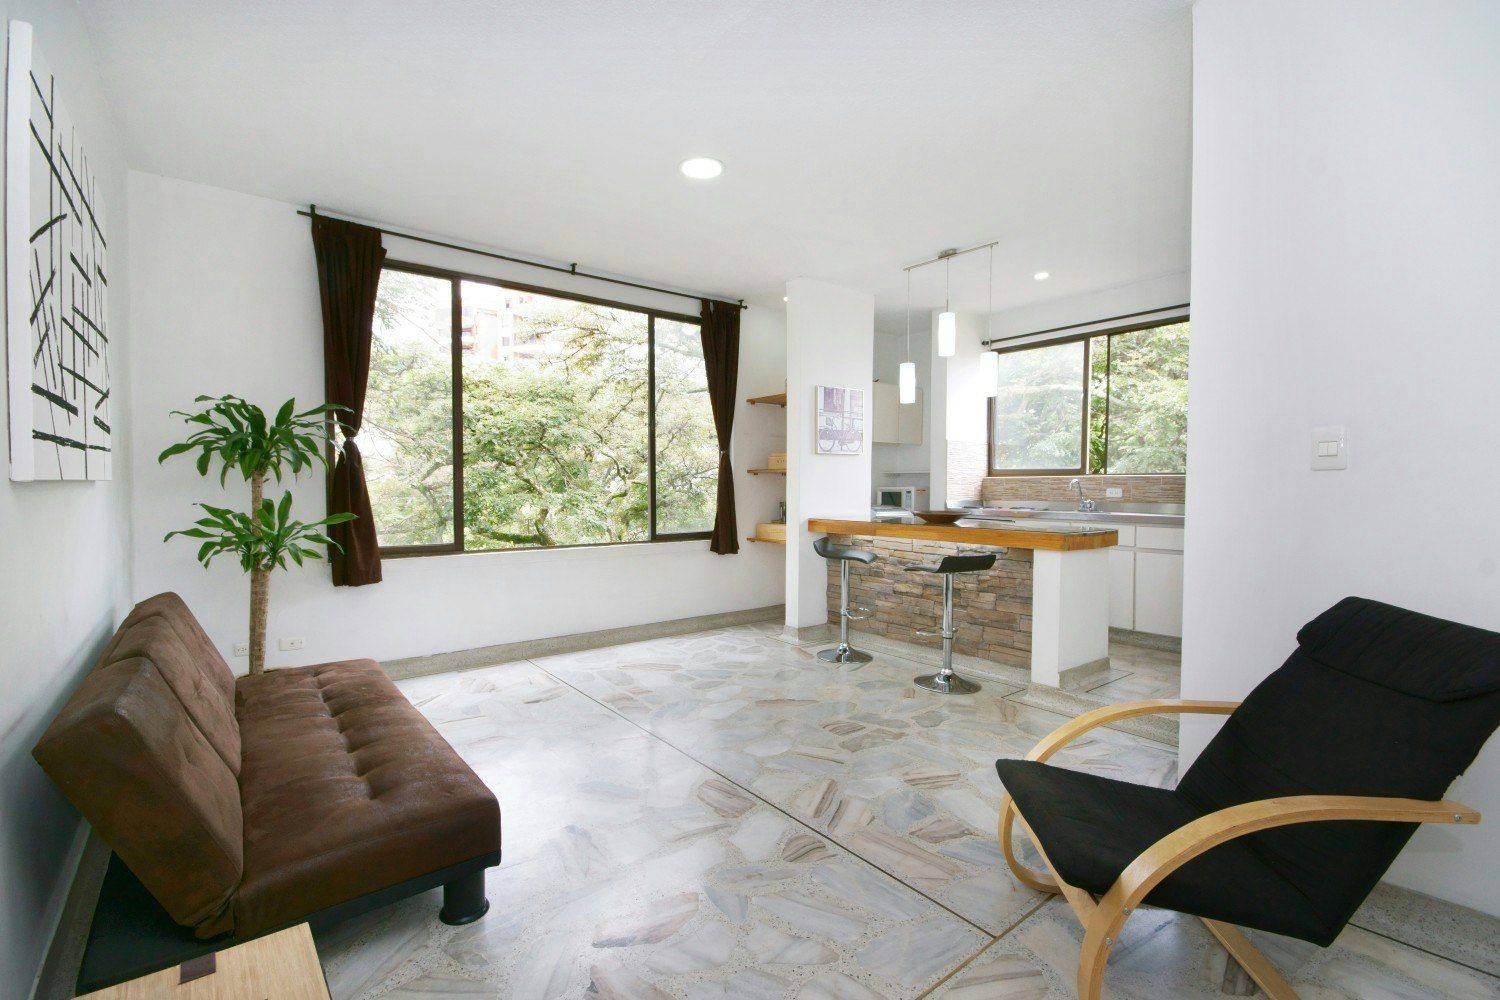 An apartment in Cali, Colombia